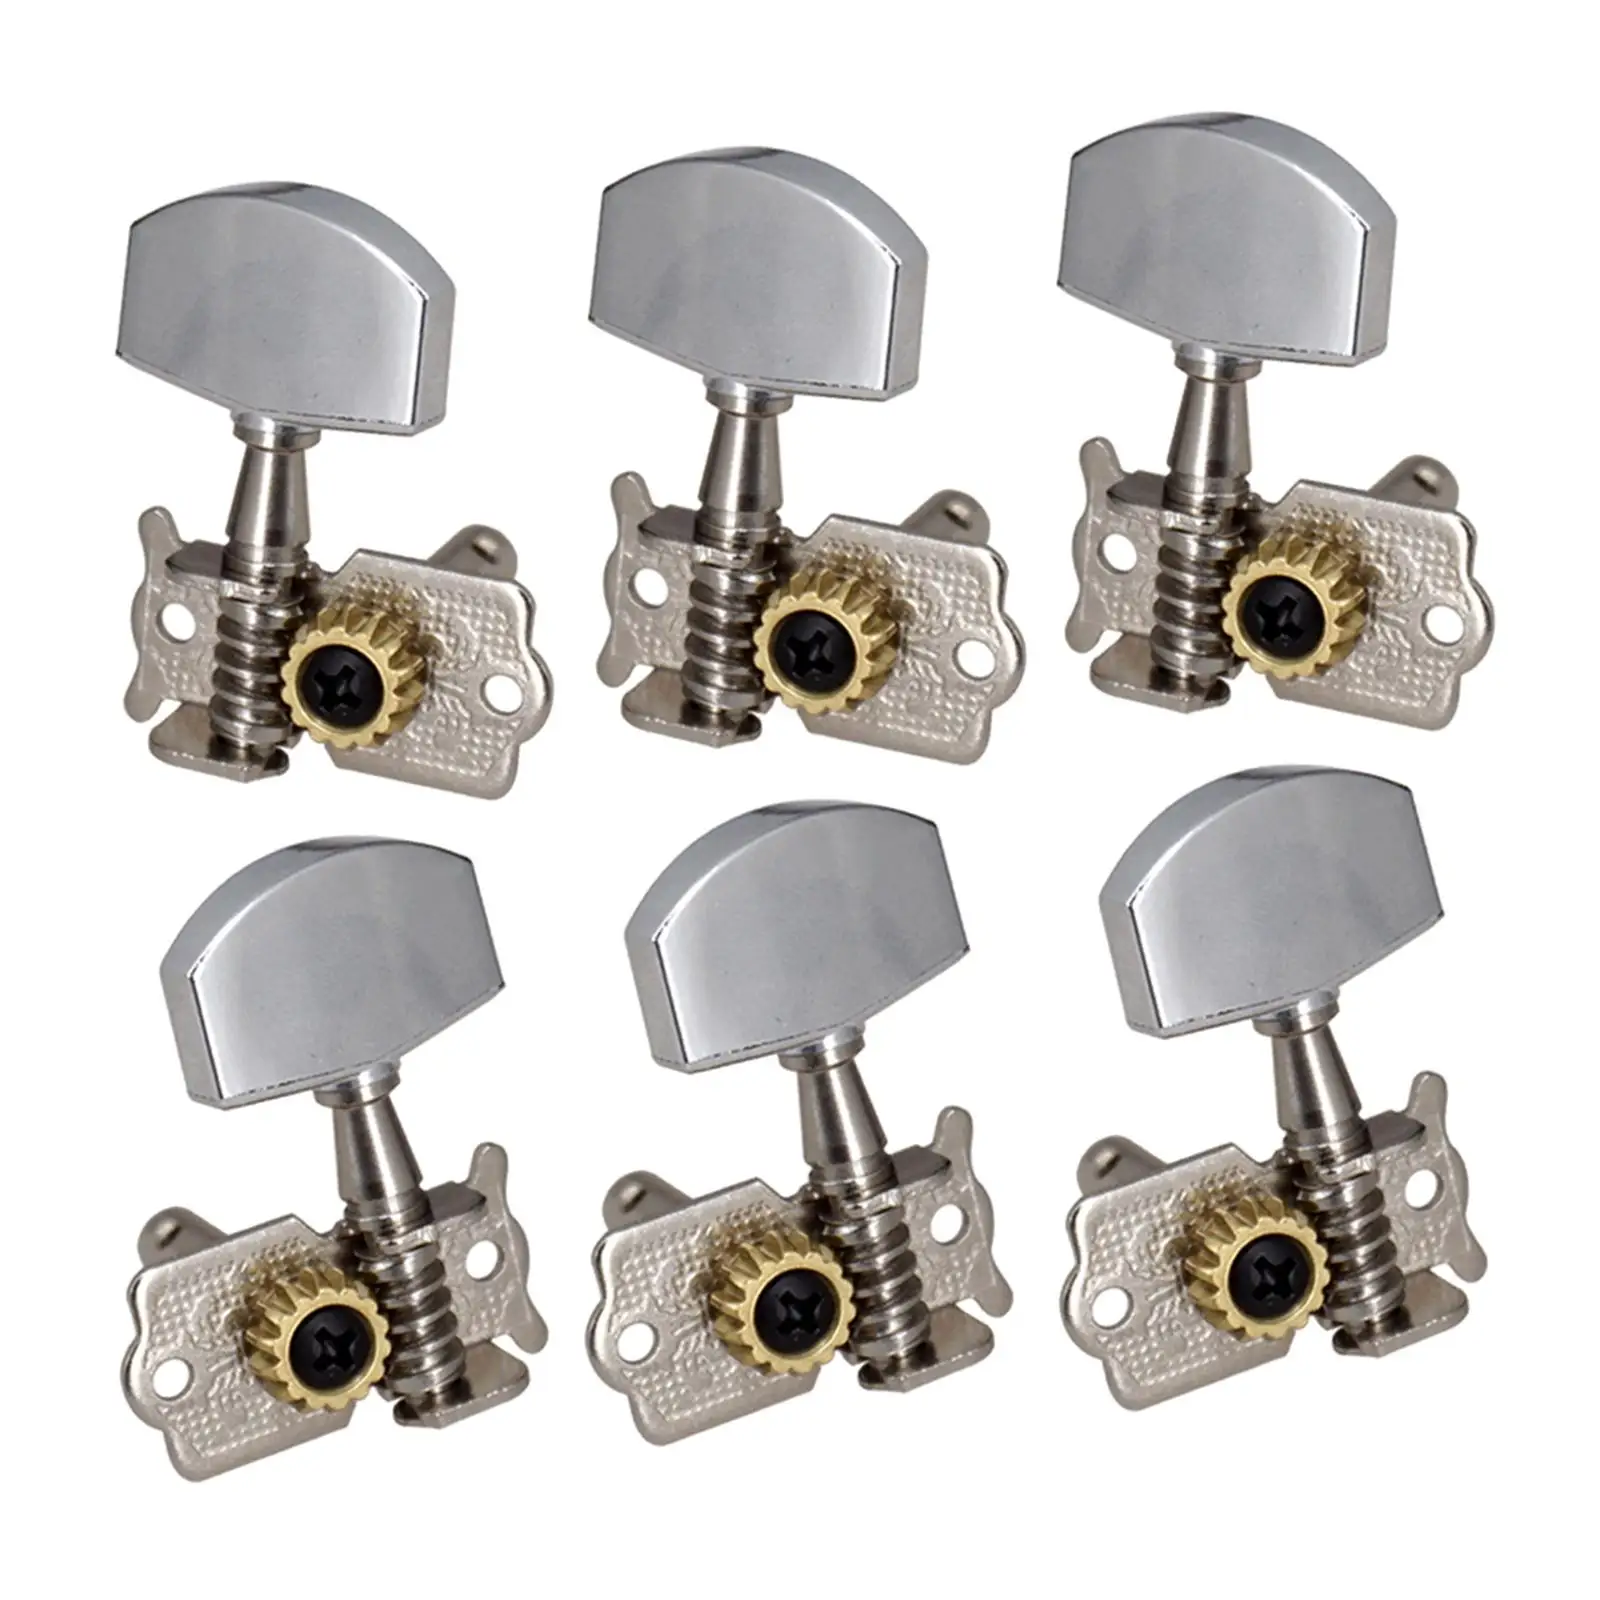 6Pcs Guitar 3L 3R Open String Button Tuning Pegs for Acoustic Guitar Accessories